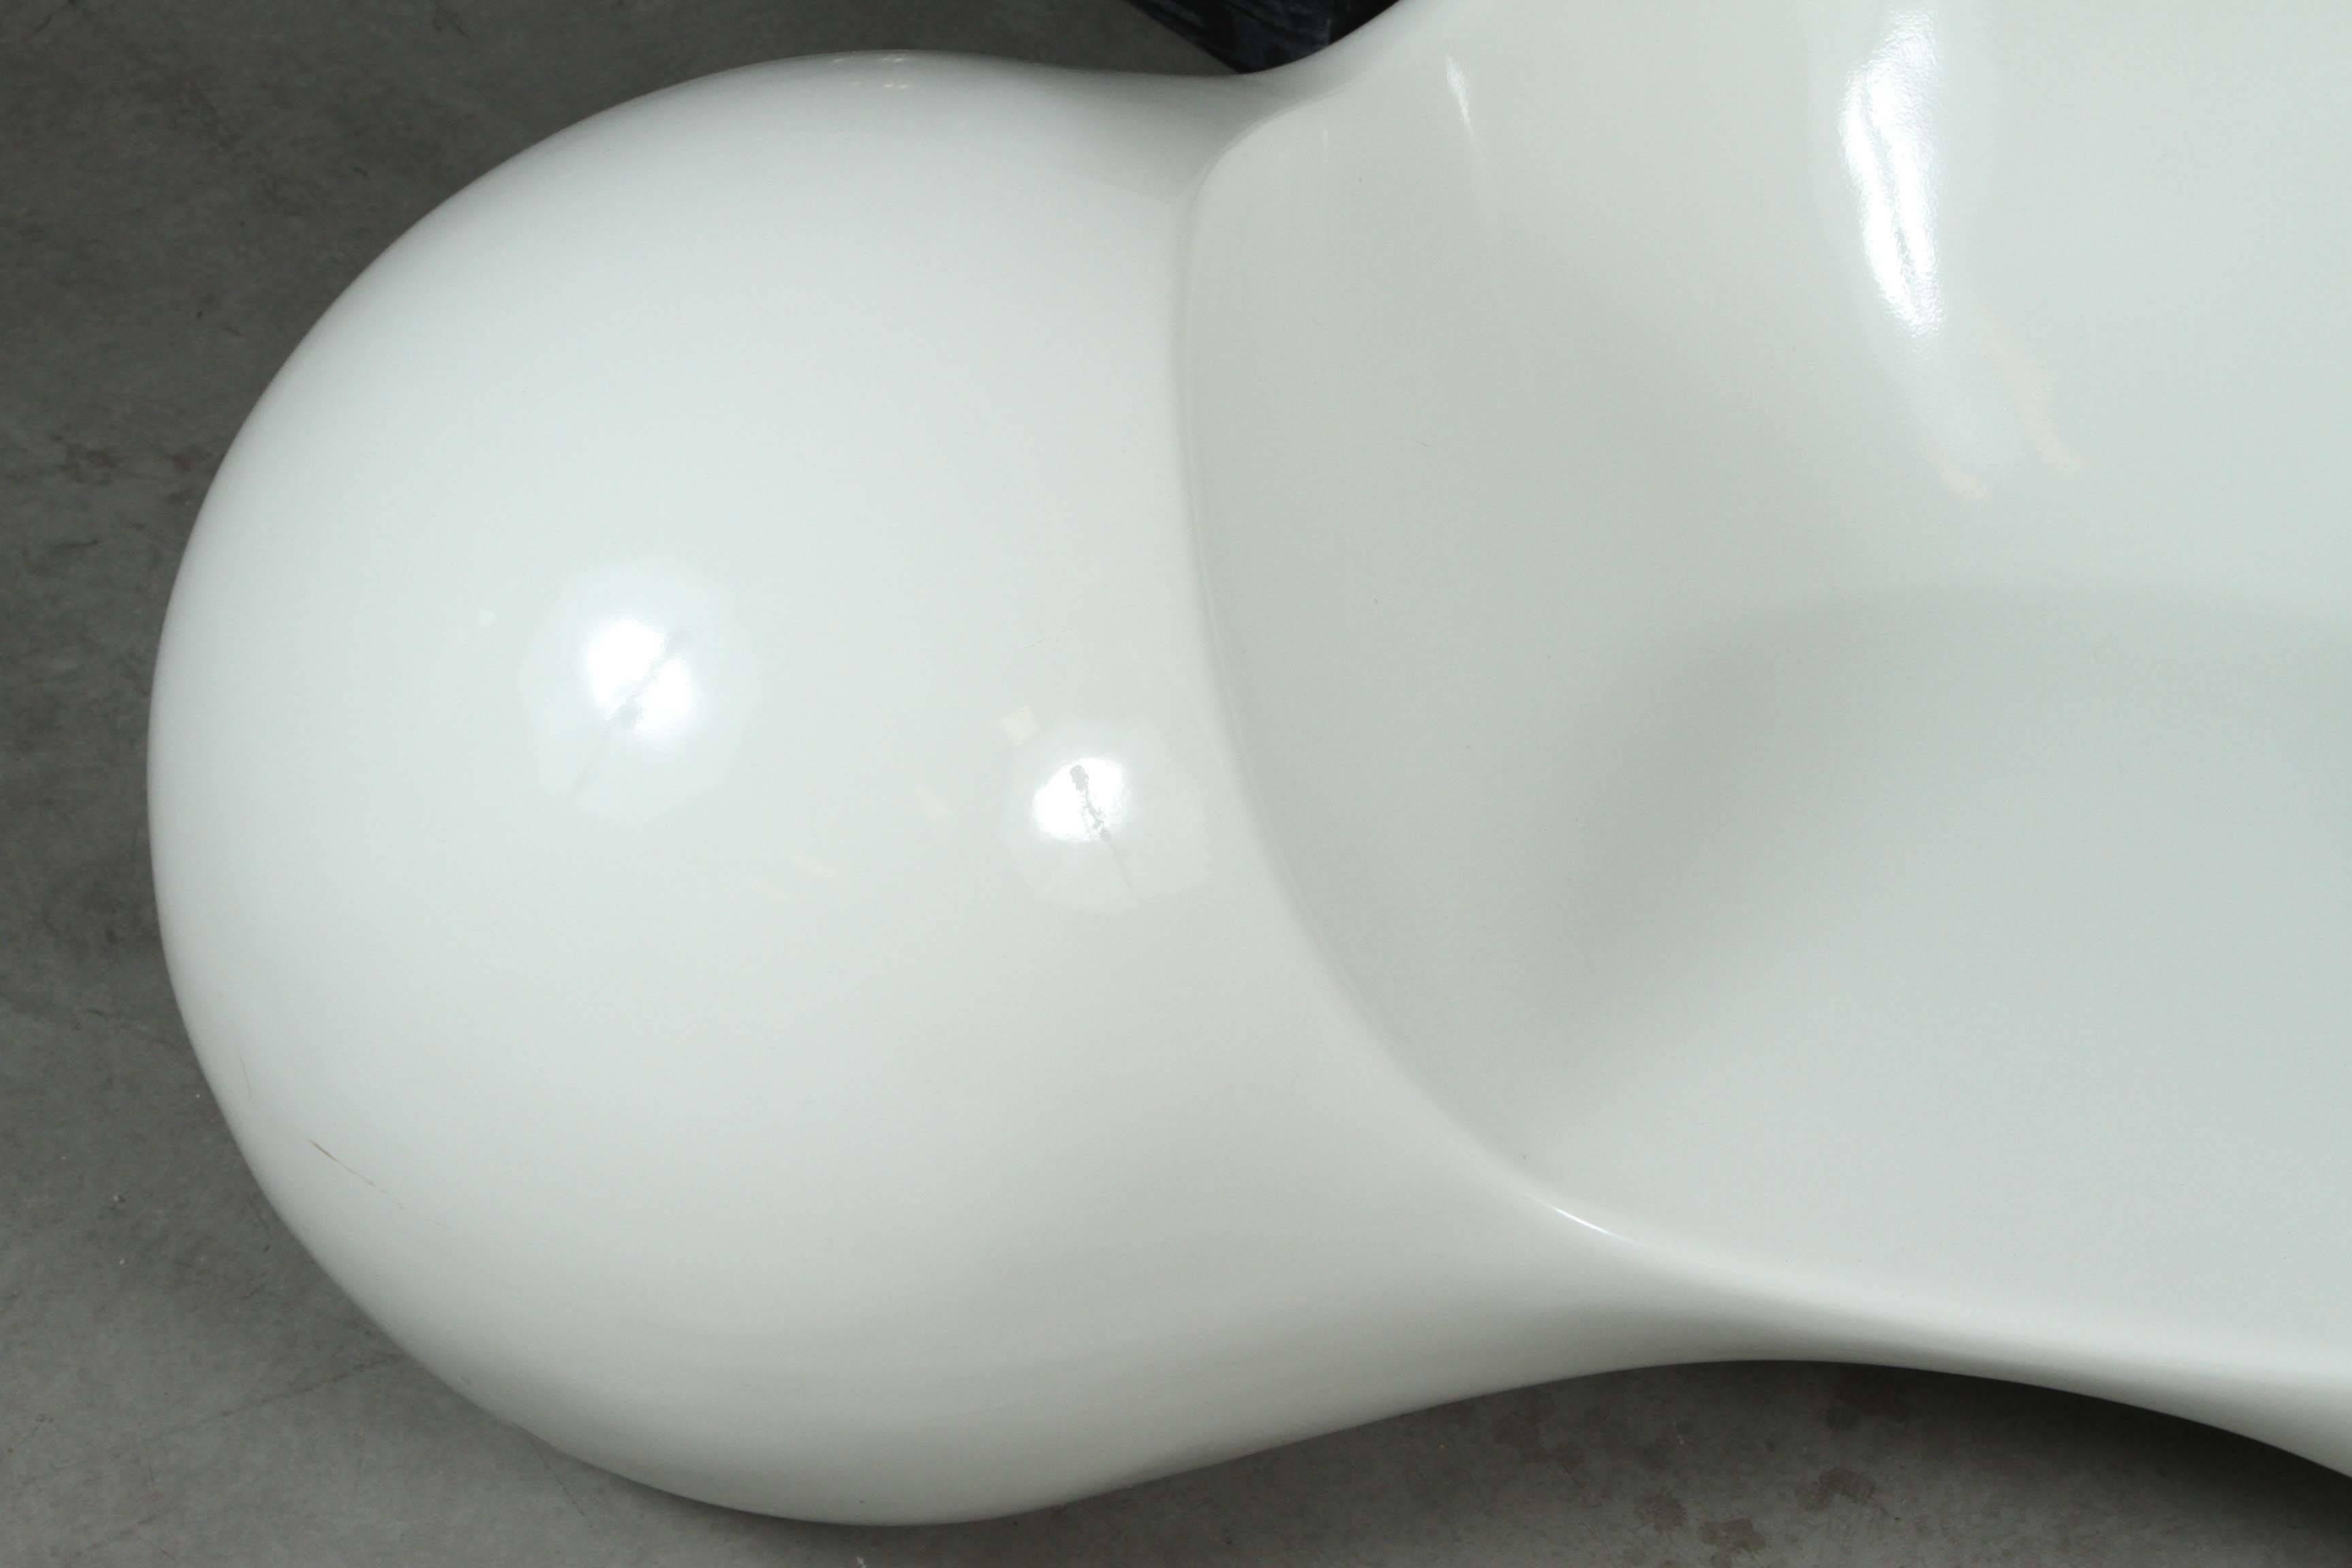 Iconic molded fiberglass chair by Eero Aarnio in white.